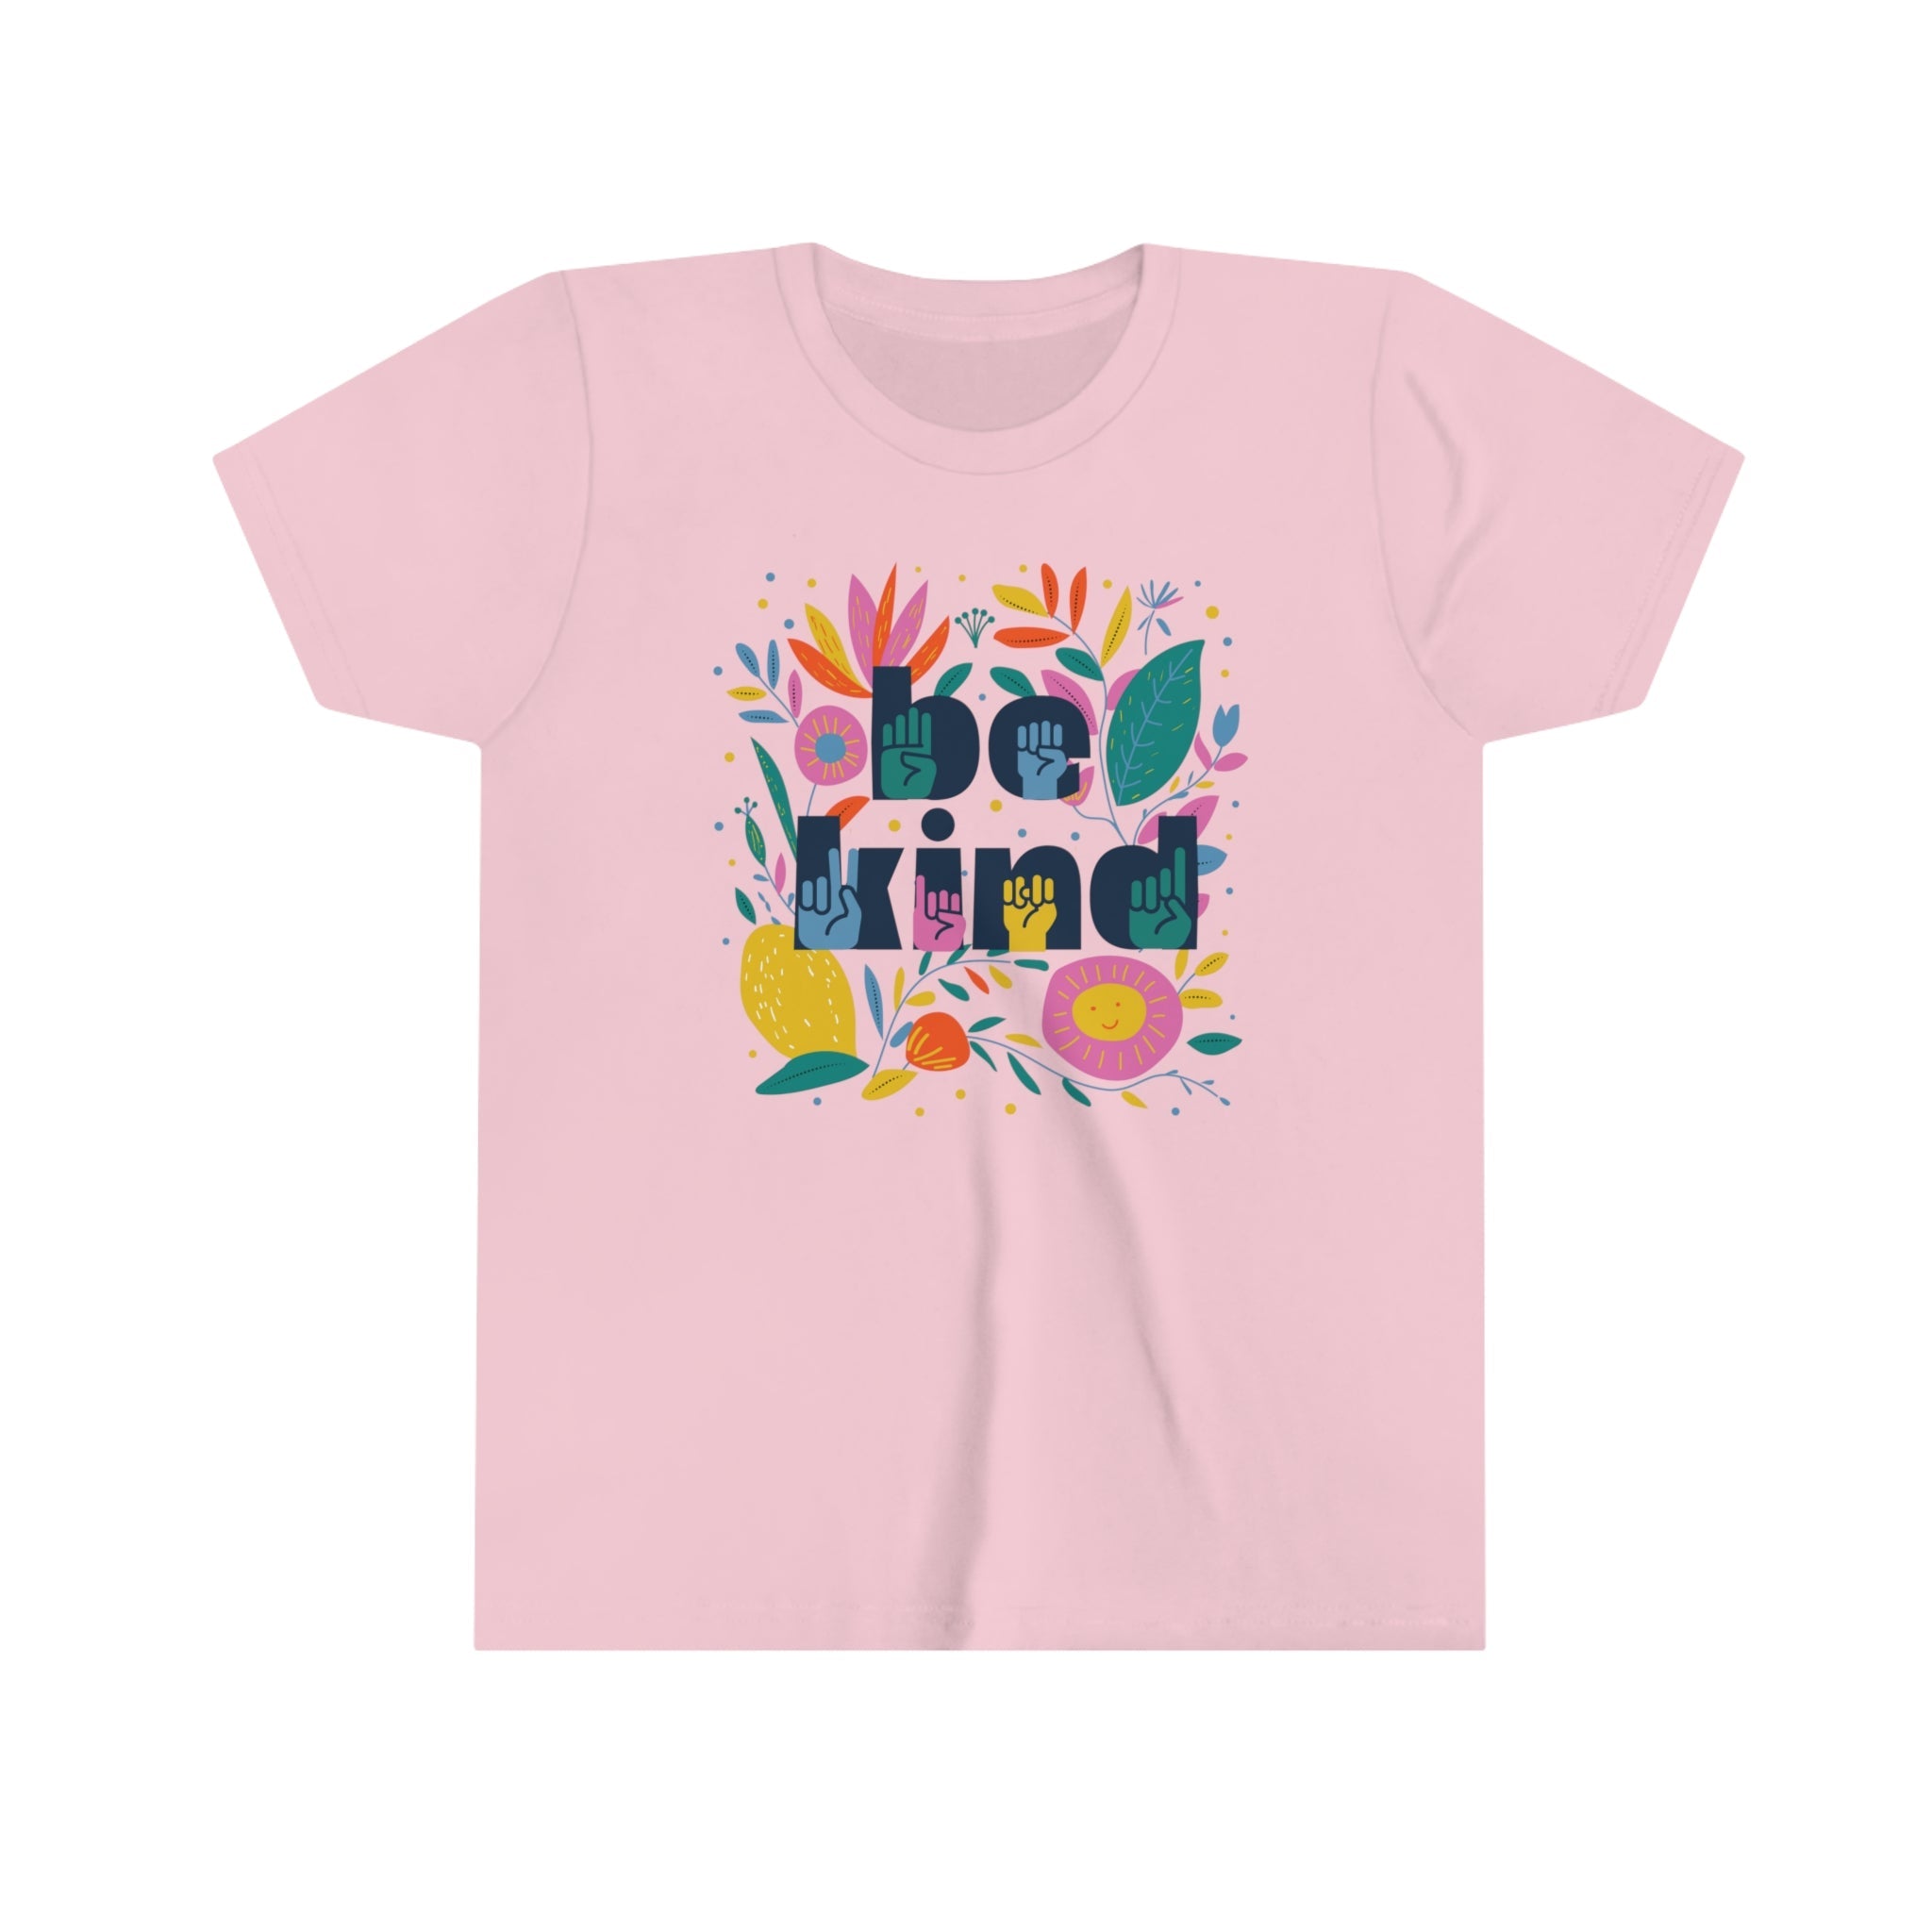 Be Kind Floral Youth Unisex Fit Tee - The Kindness Cause